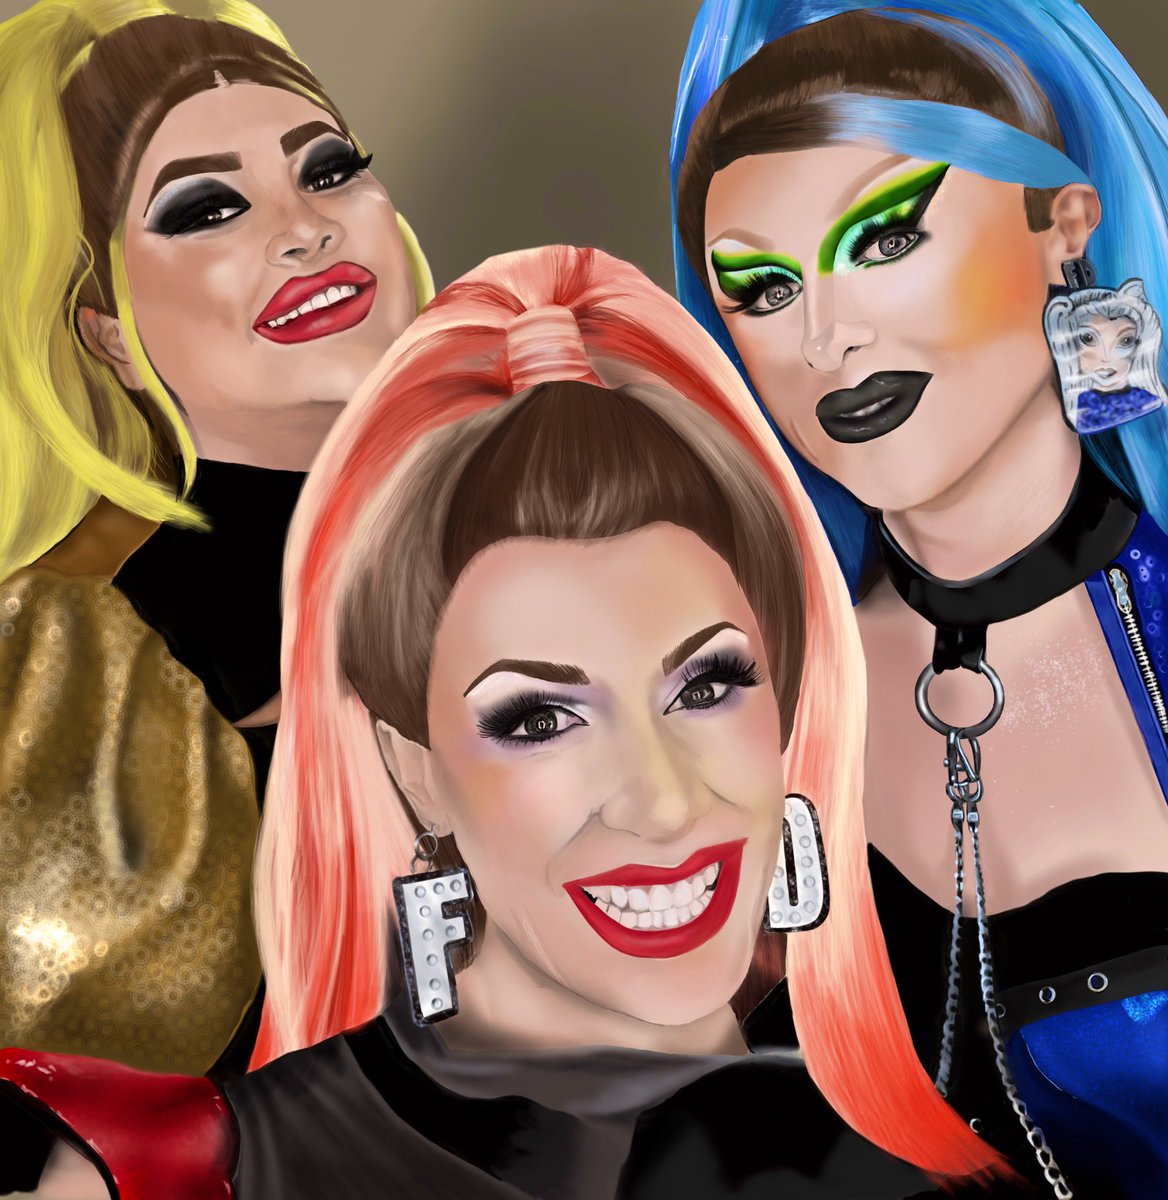 A little sketch of my faves ❤️ @Divinadecampo @BluHydrangea_ @ChipShopBird #Frock4Life